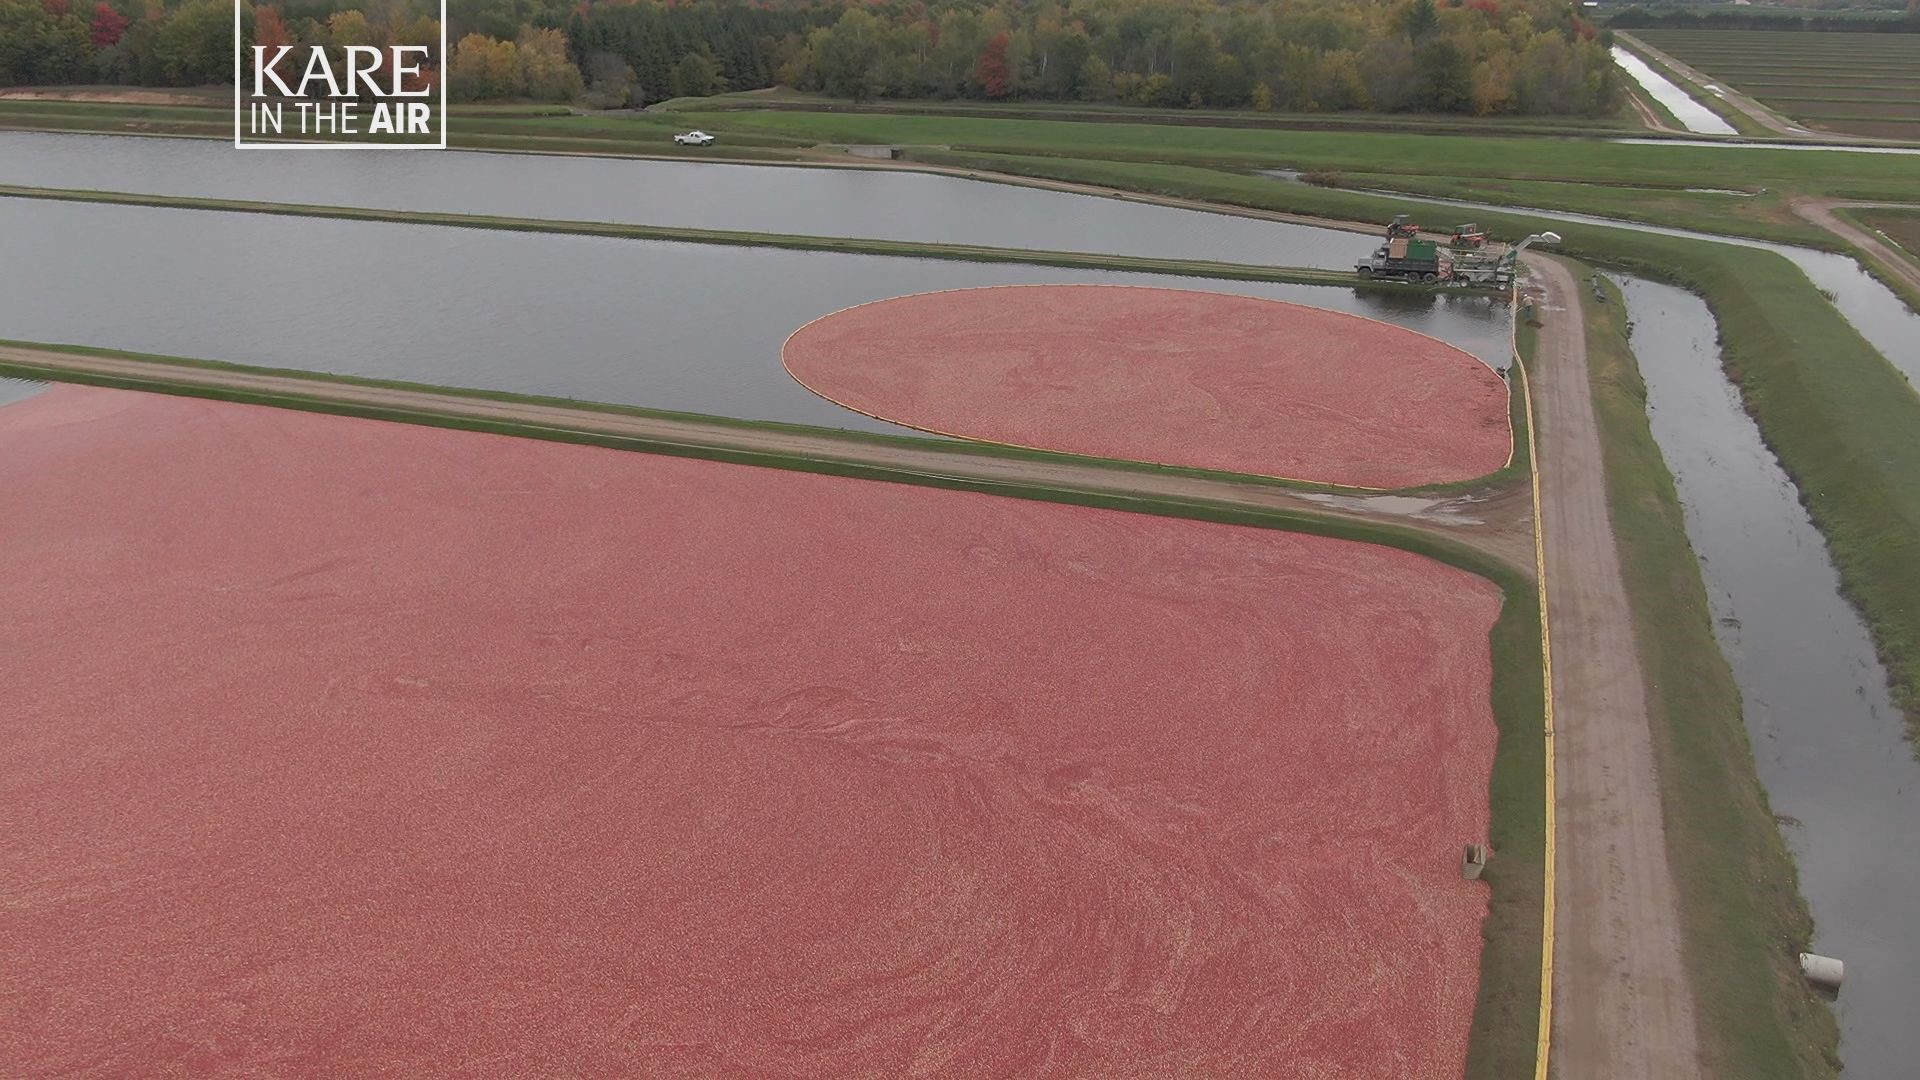 Our KARE in the Air drone captures the harvest at a cranberry bog in Wisconsin Rapids.